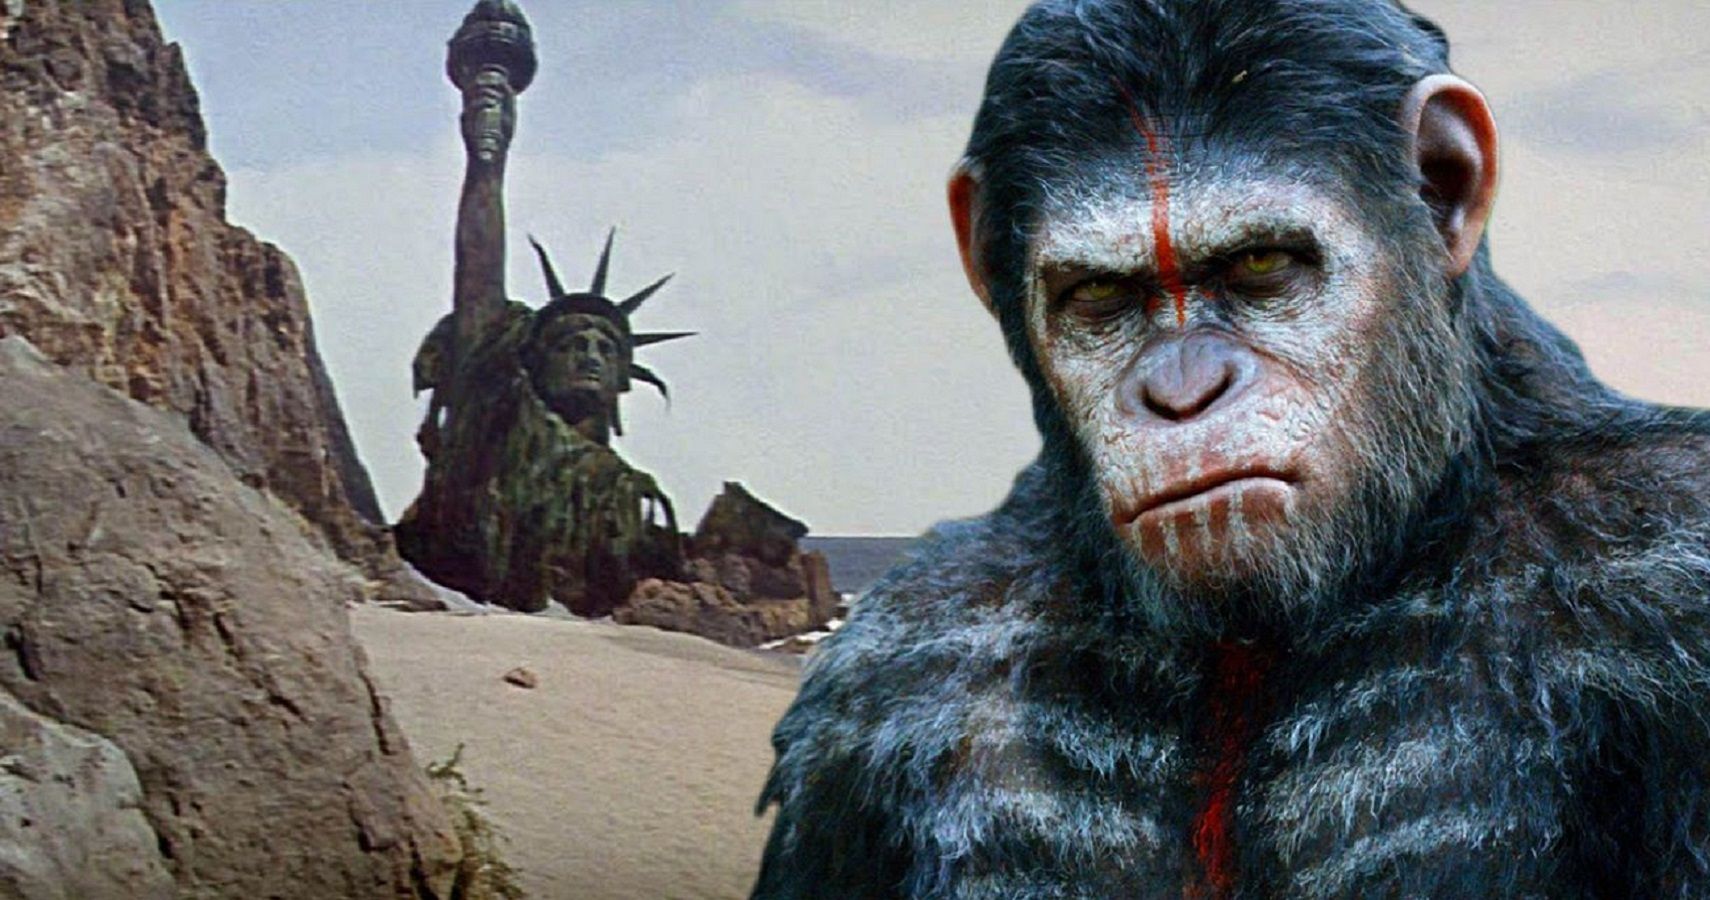 Of The Apes Franchise Ranked